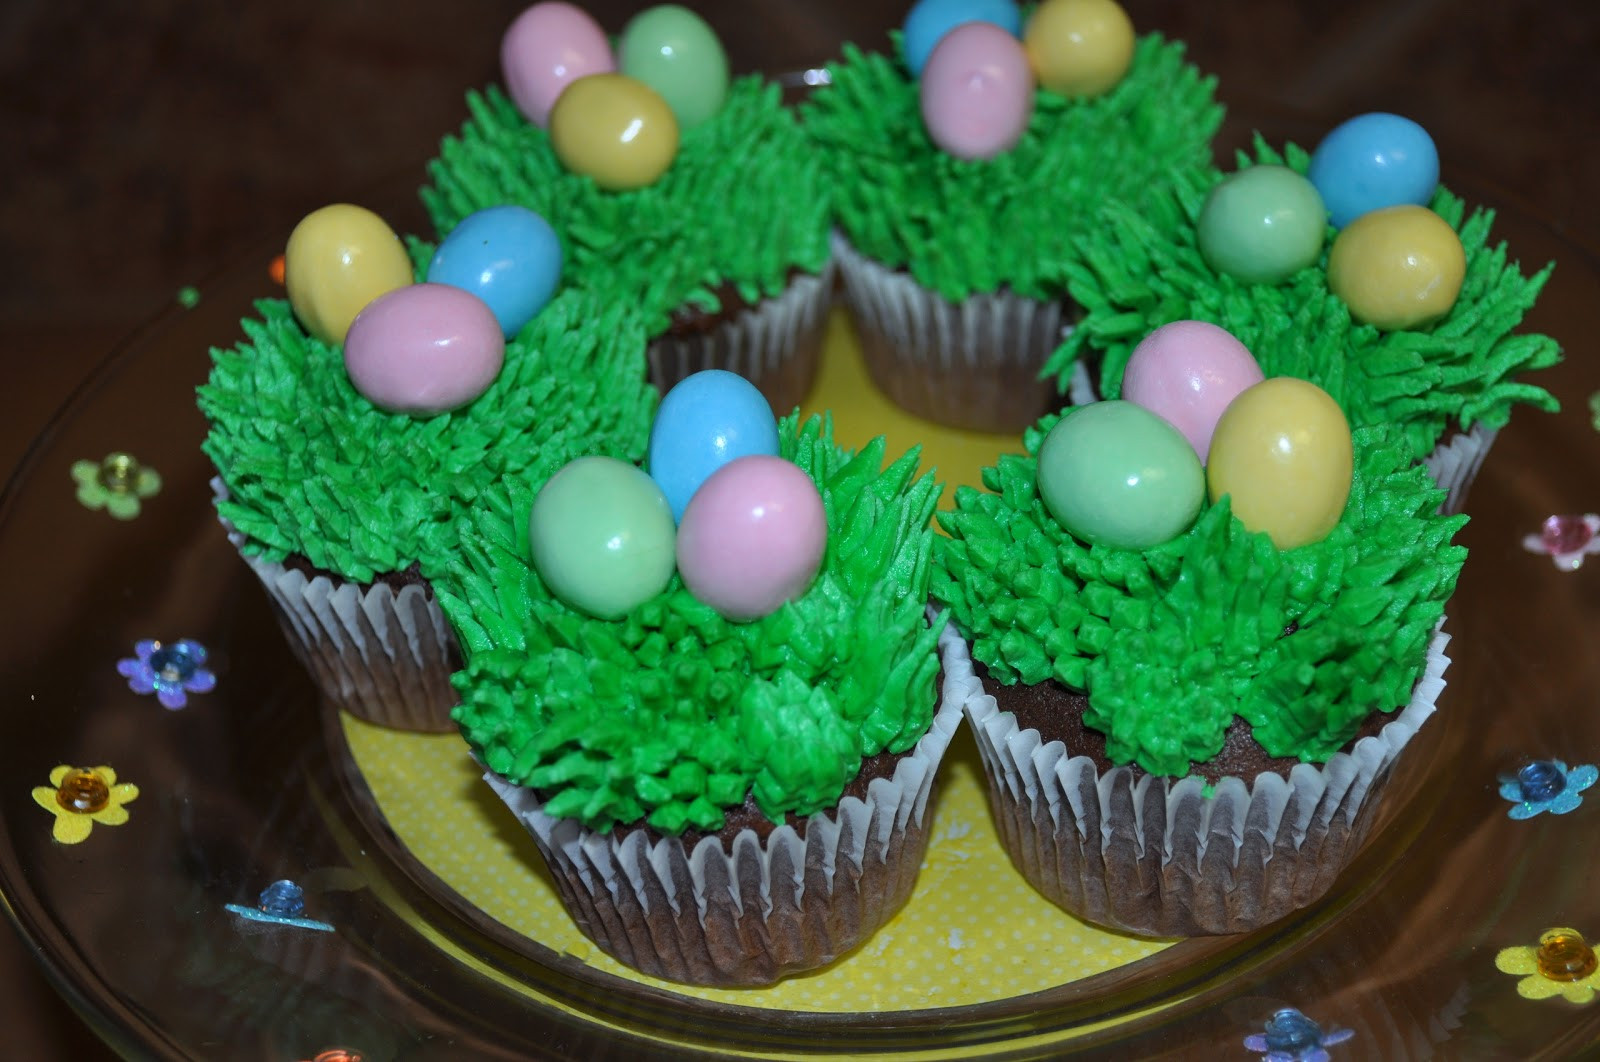 Cupcakes For Easter
 Morgan s Cakes Easter Cupcakes